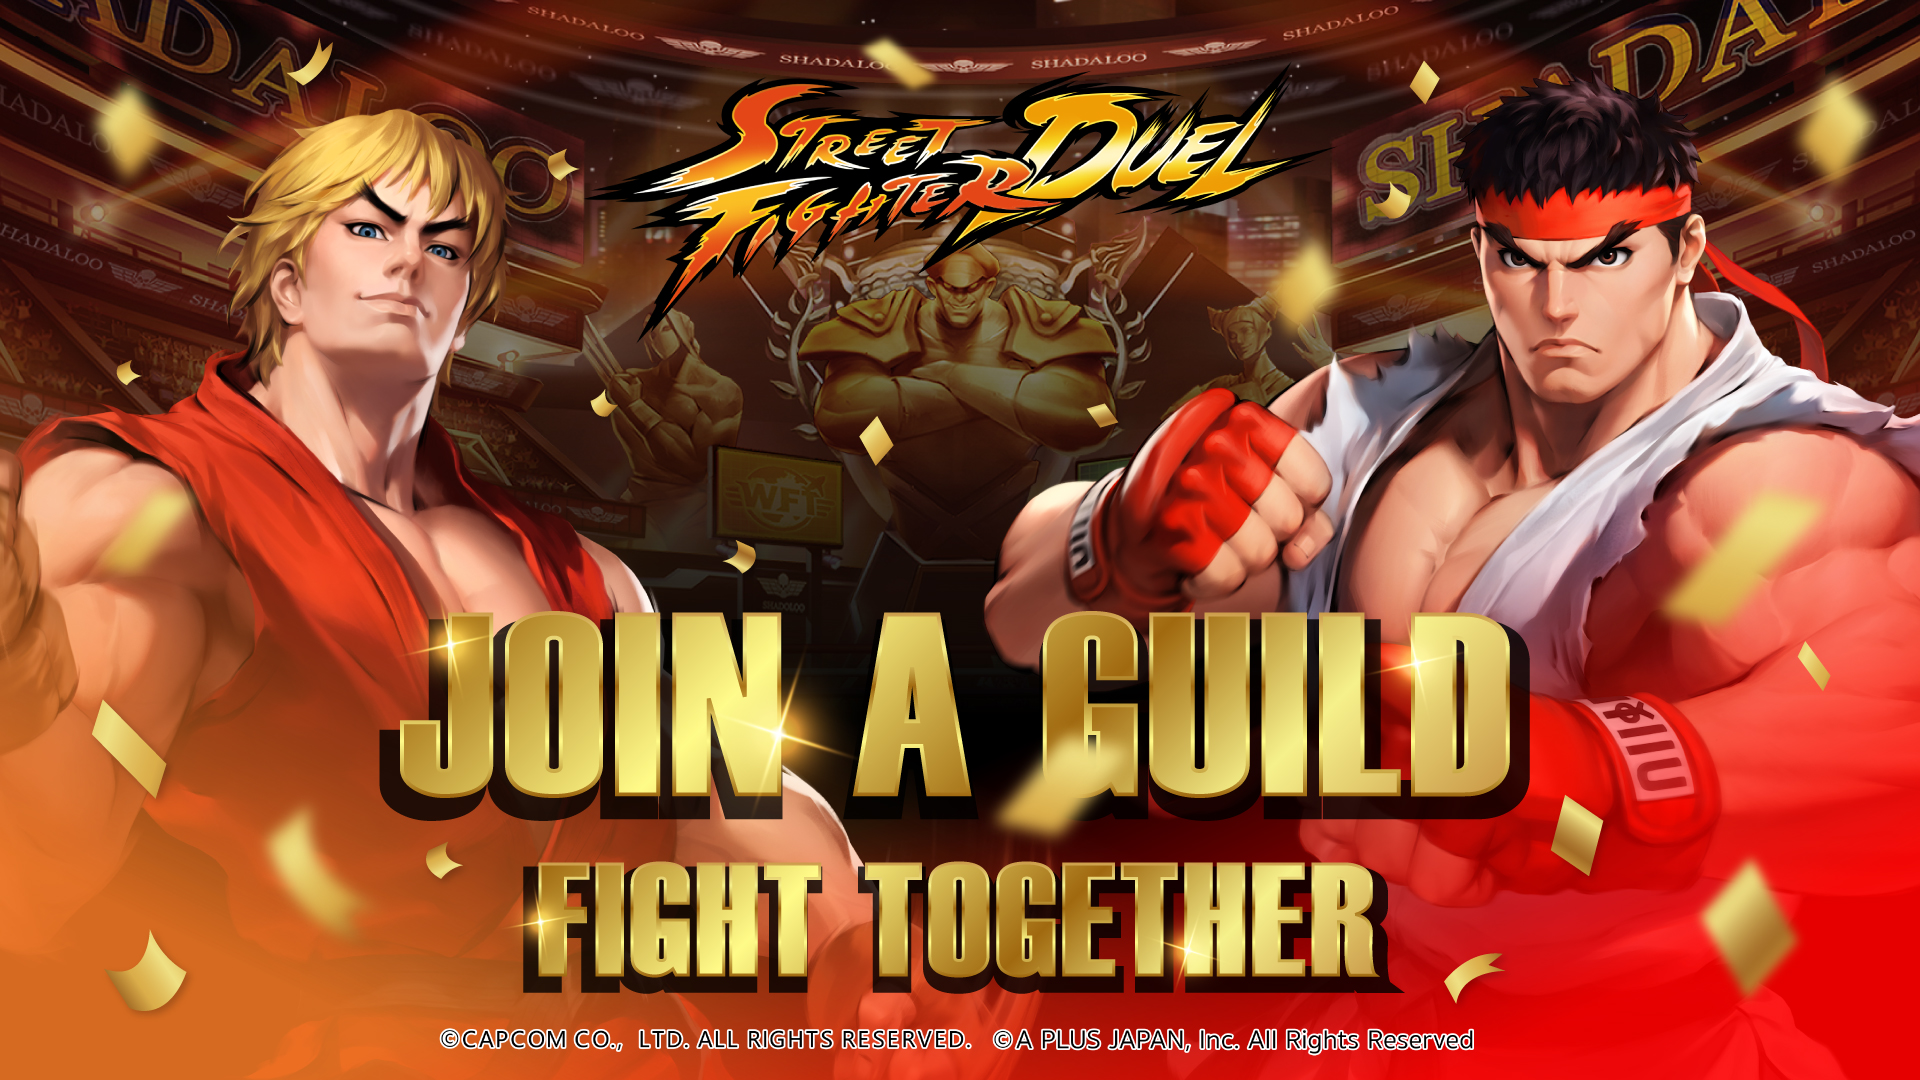 Street Fighter: Duel by A PLUS